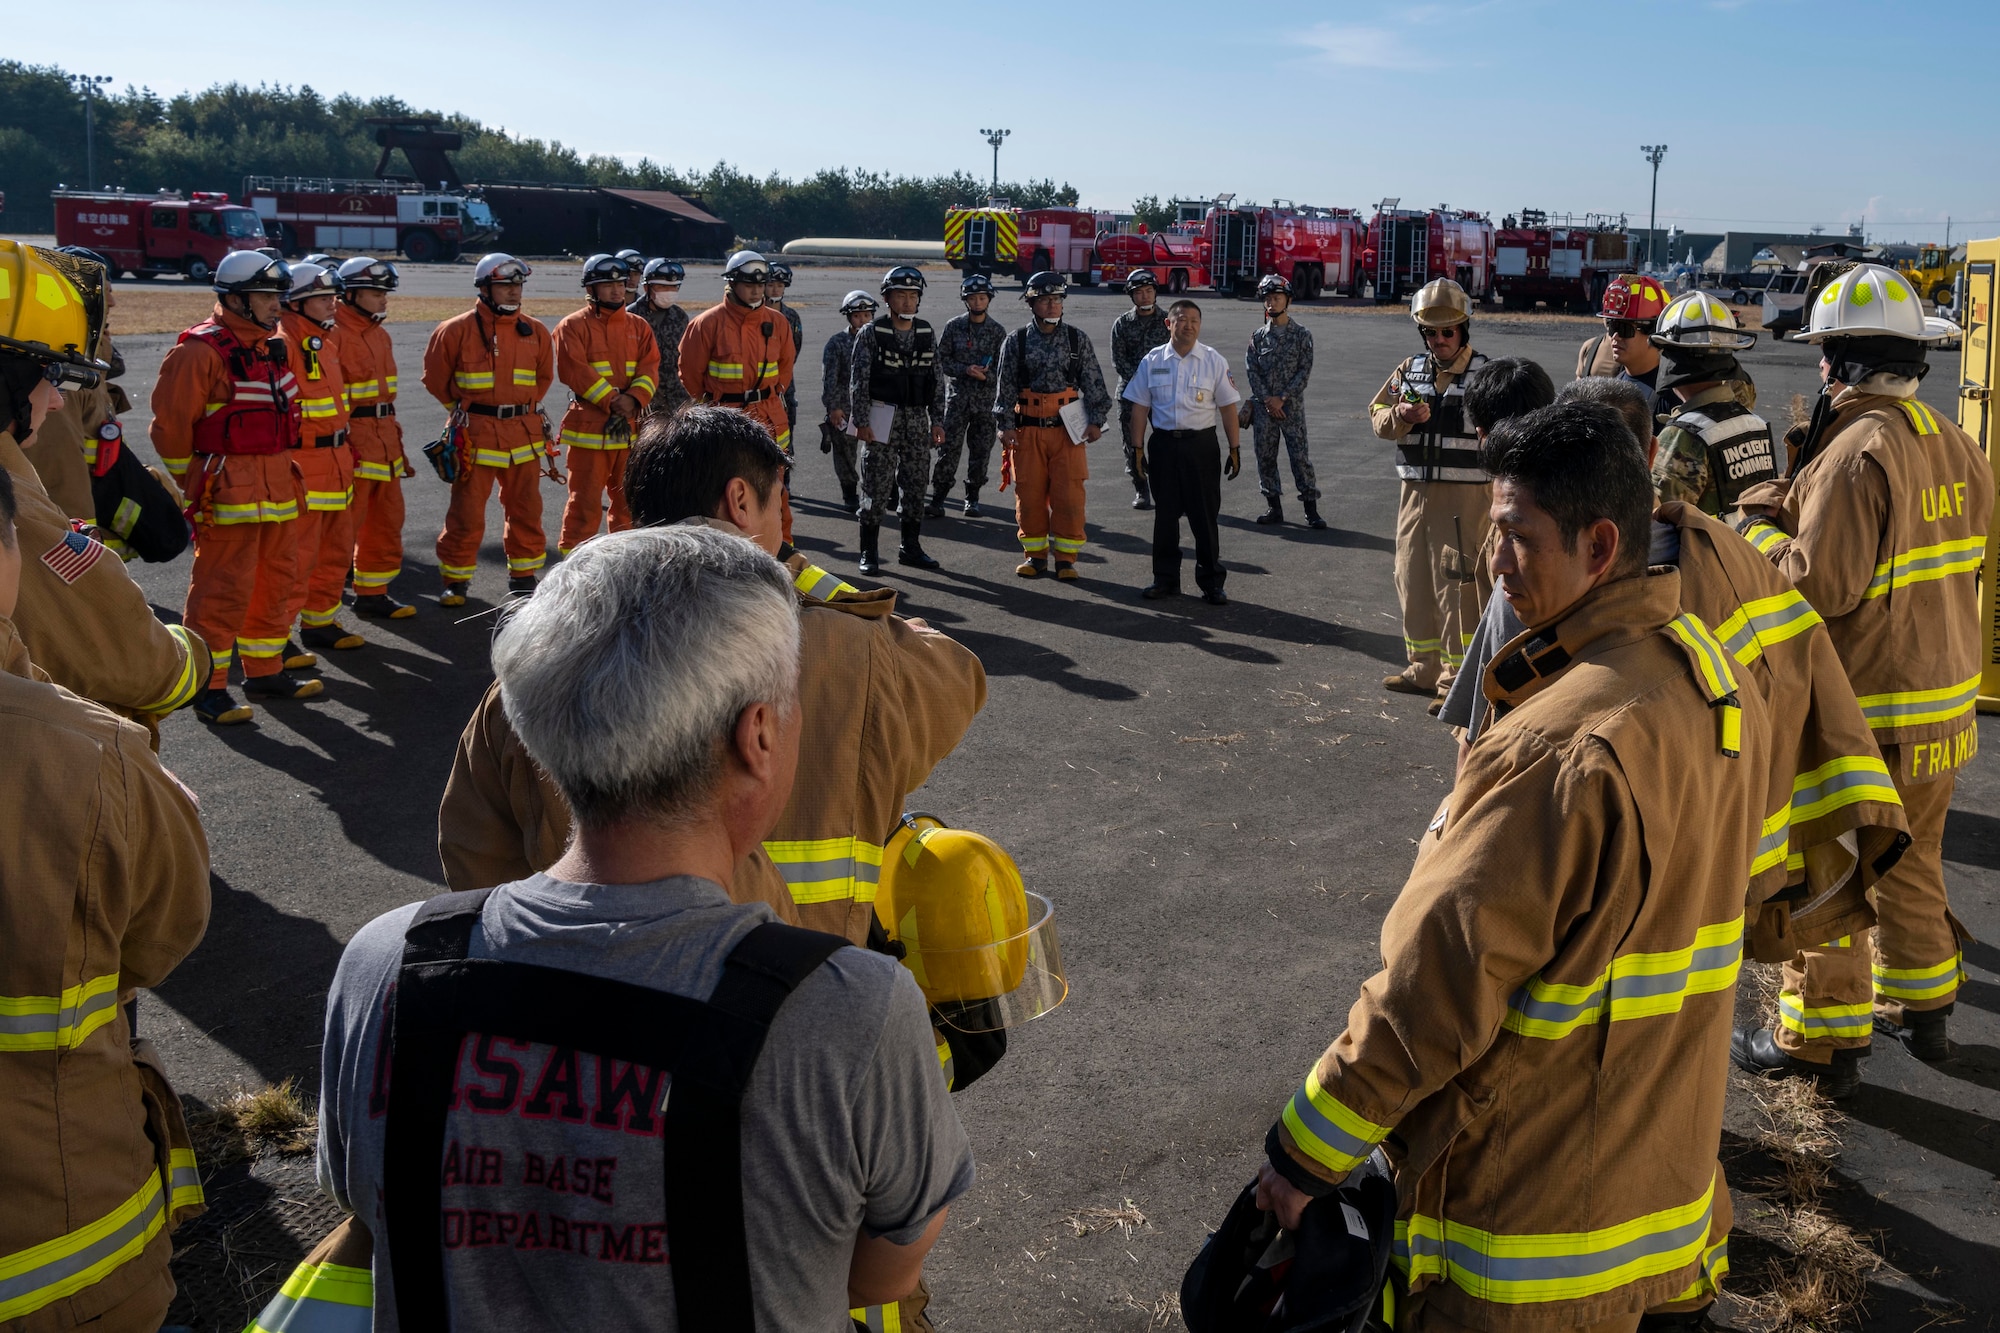 A group of firefighters standing together for a briefing.